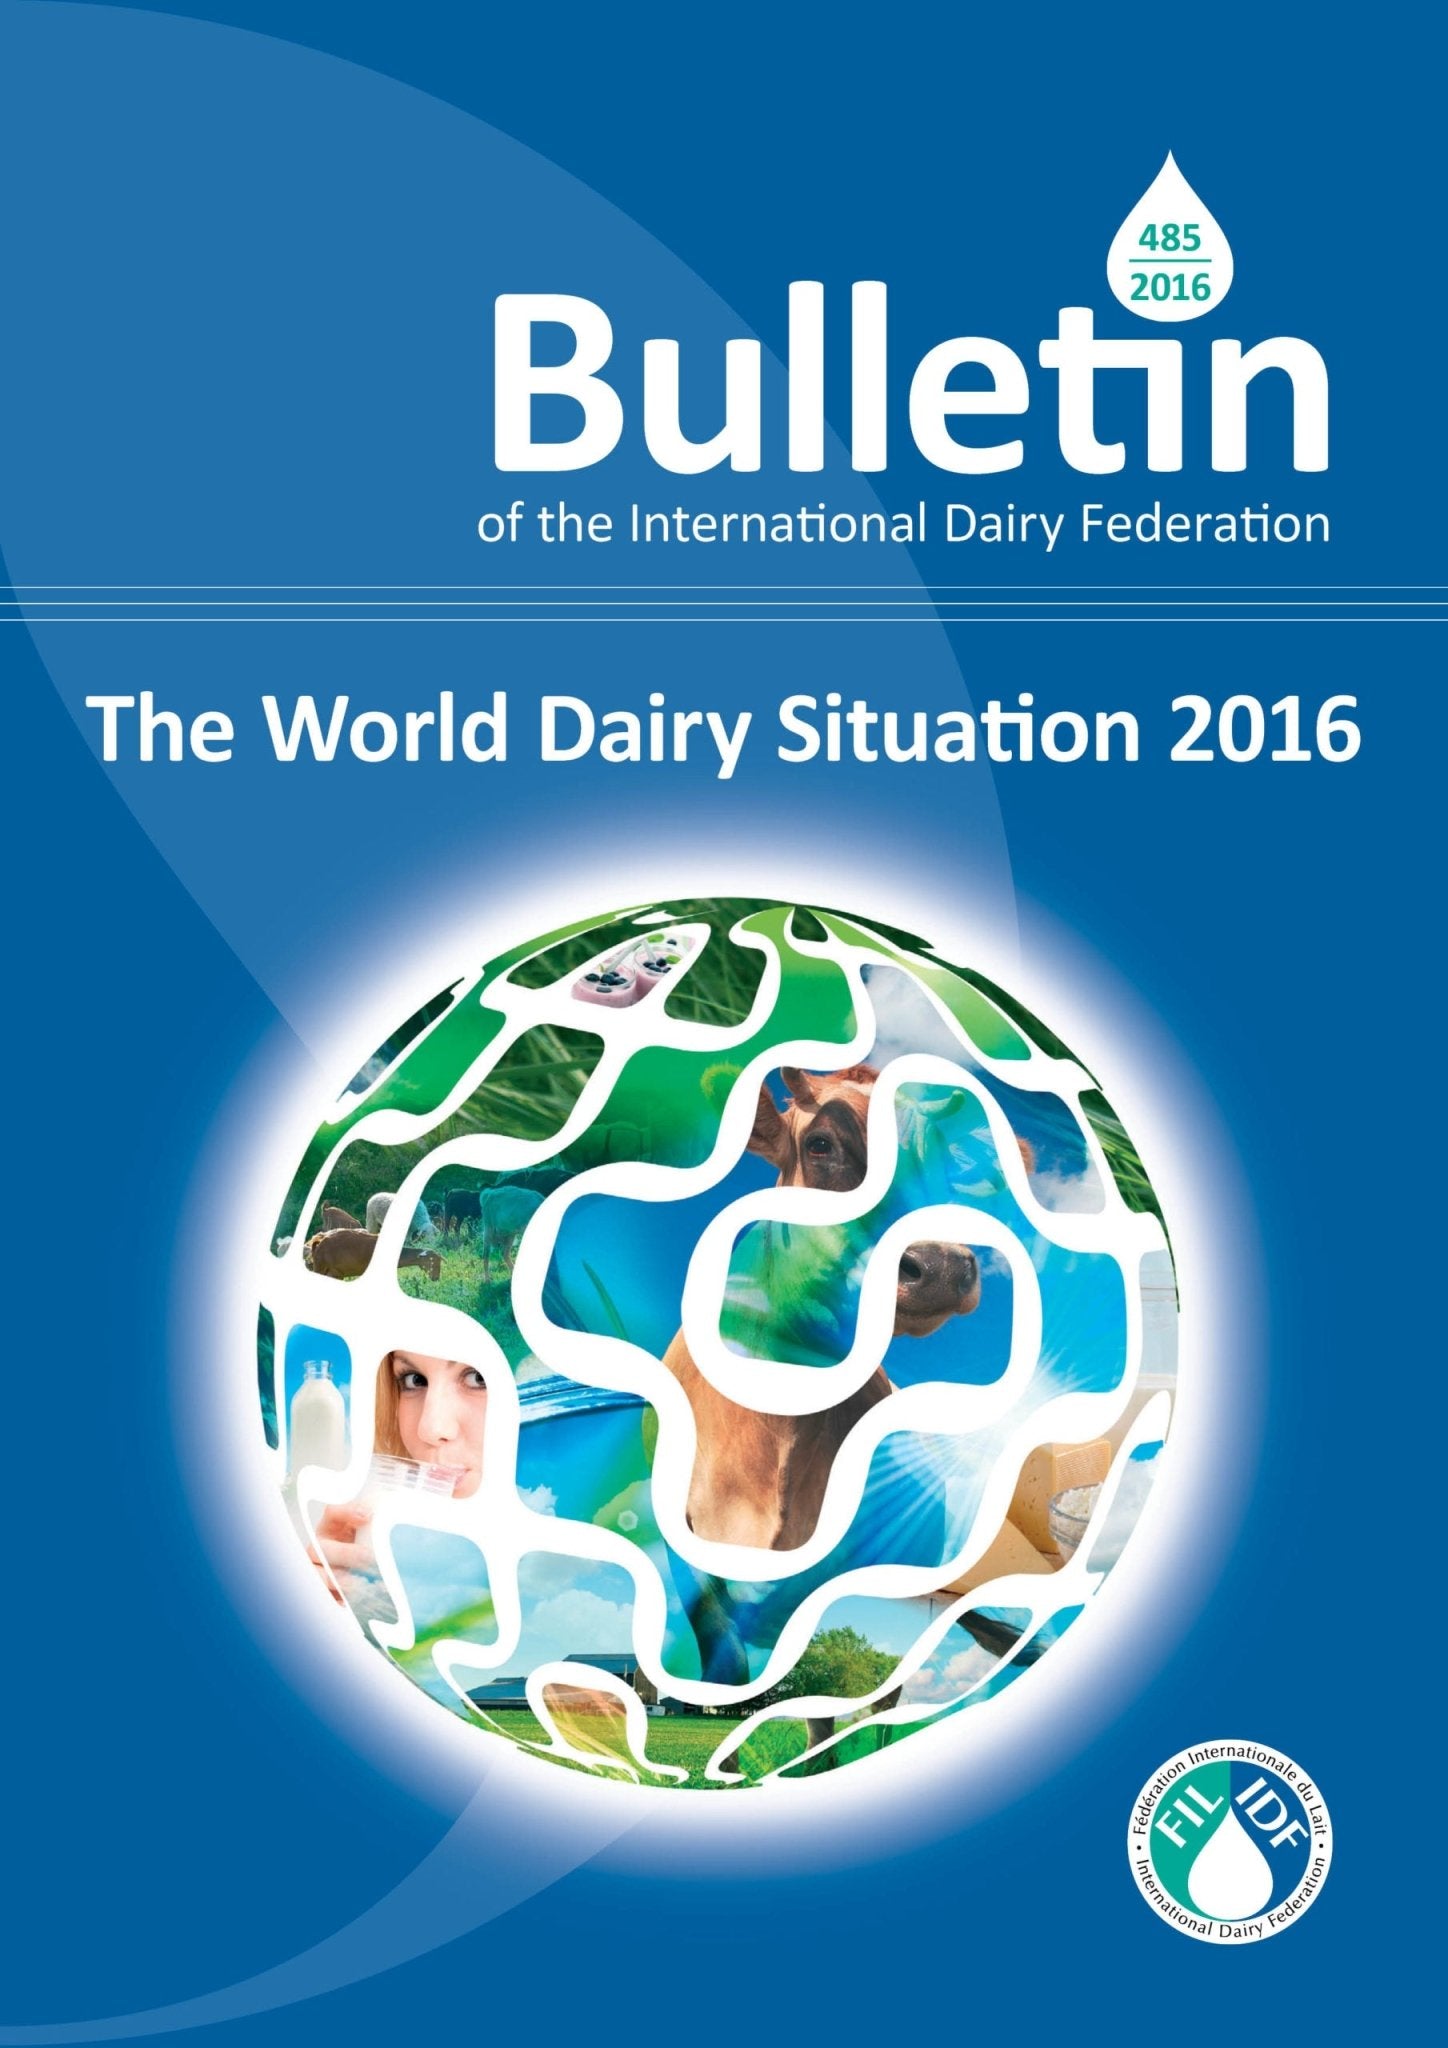 Bulletin of the IDF N° 485/2016: The World Dairy Situation 2016 - FIL-IDF